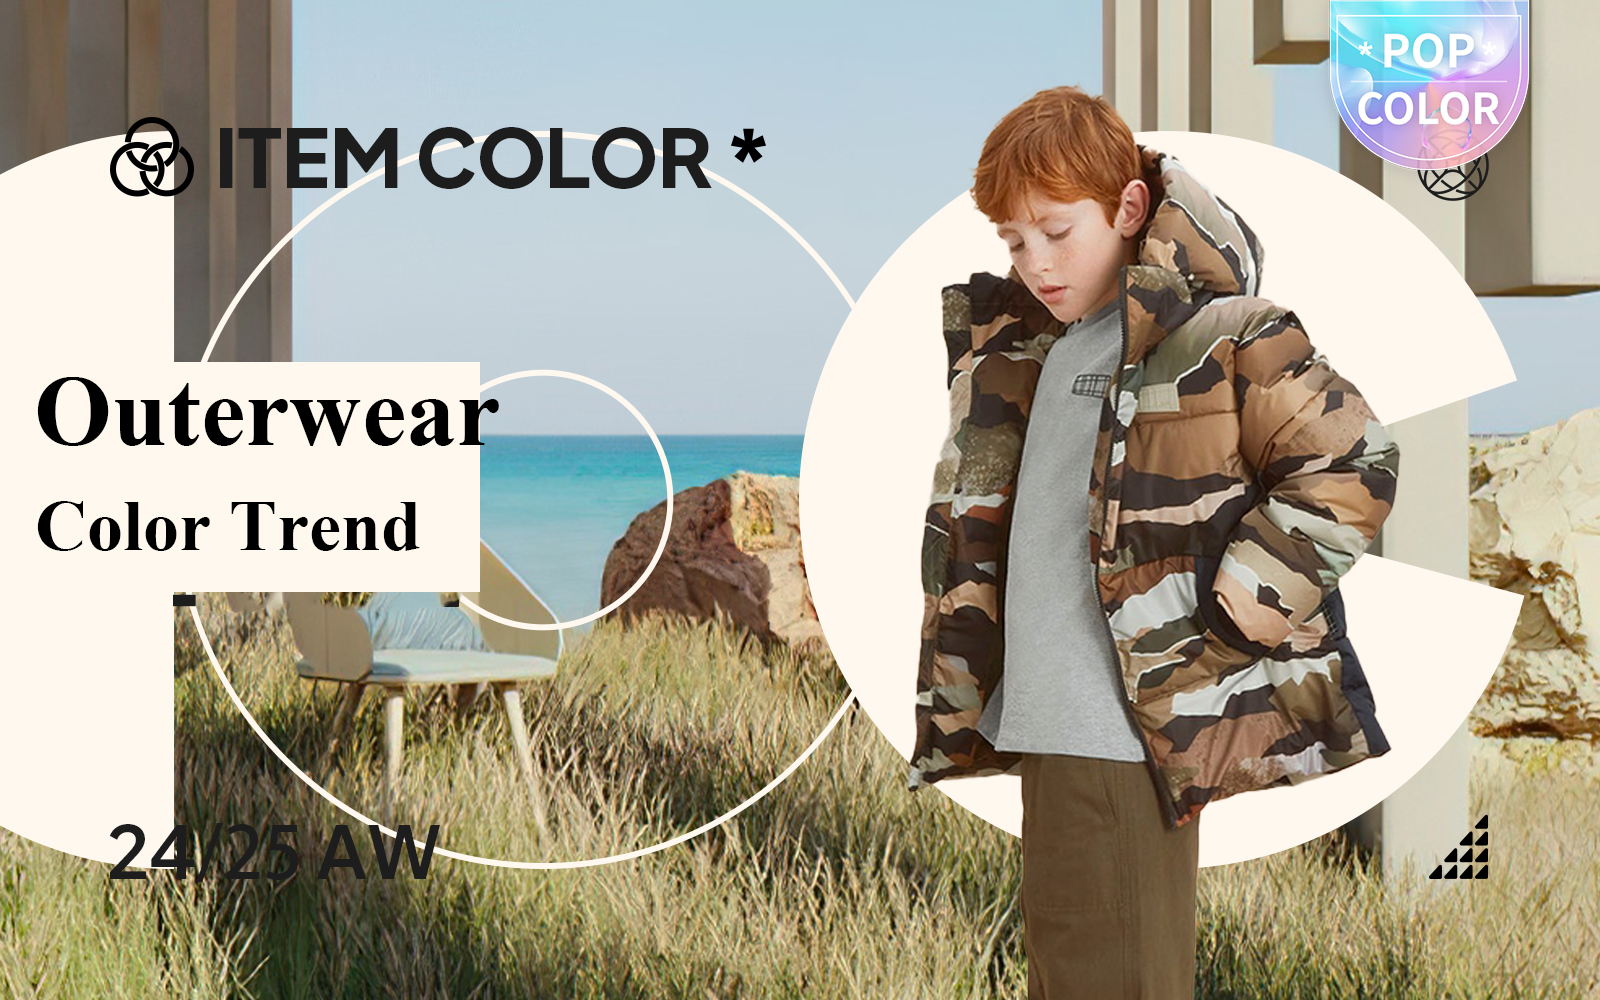 Outerwear -- The Color Trend for Boyswear